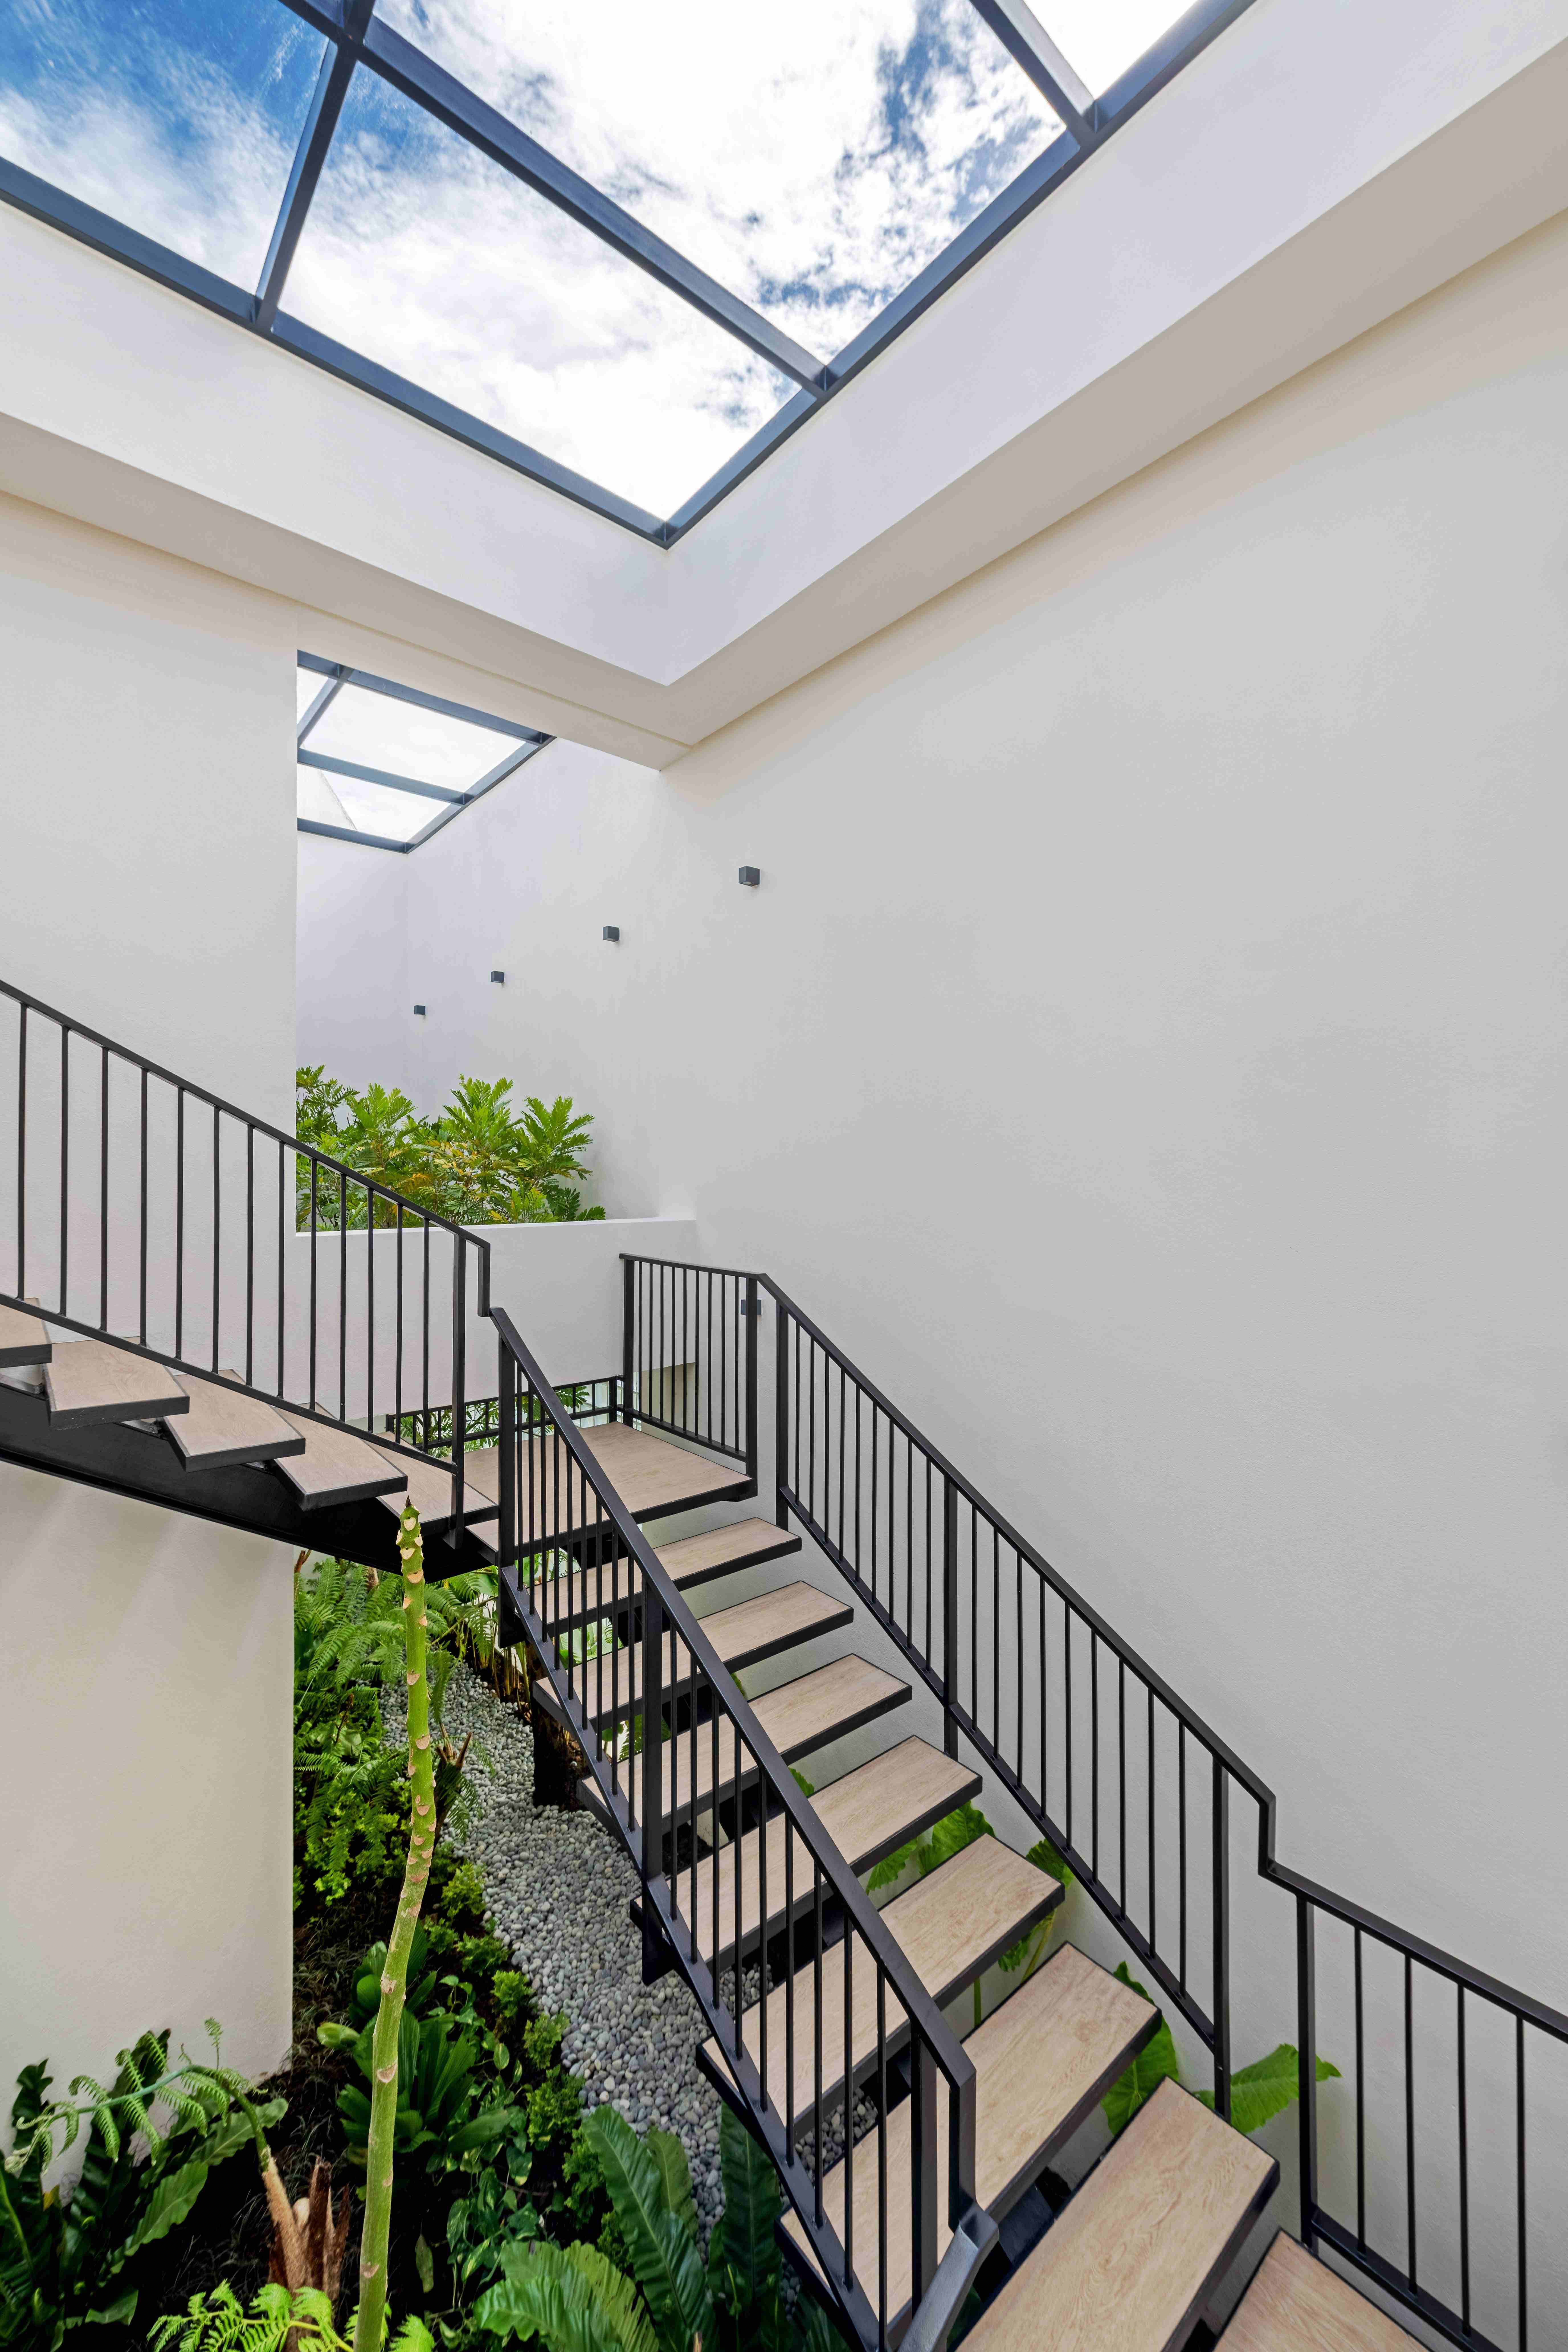 vie interior with stairs, greenery, and natural light